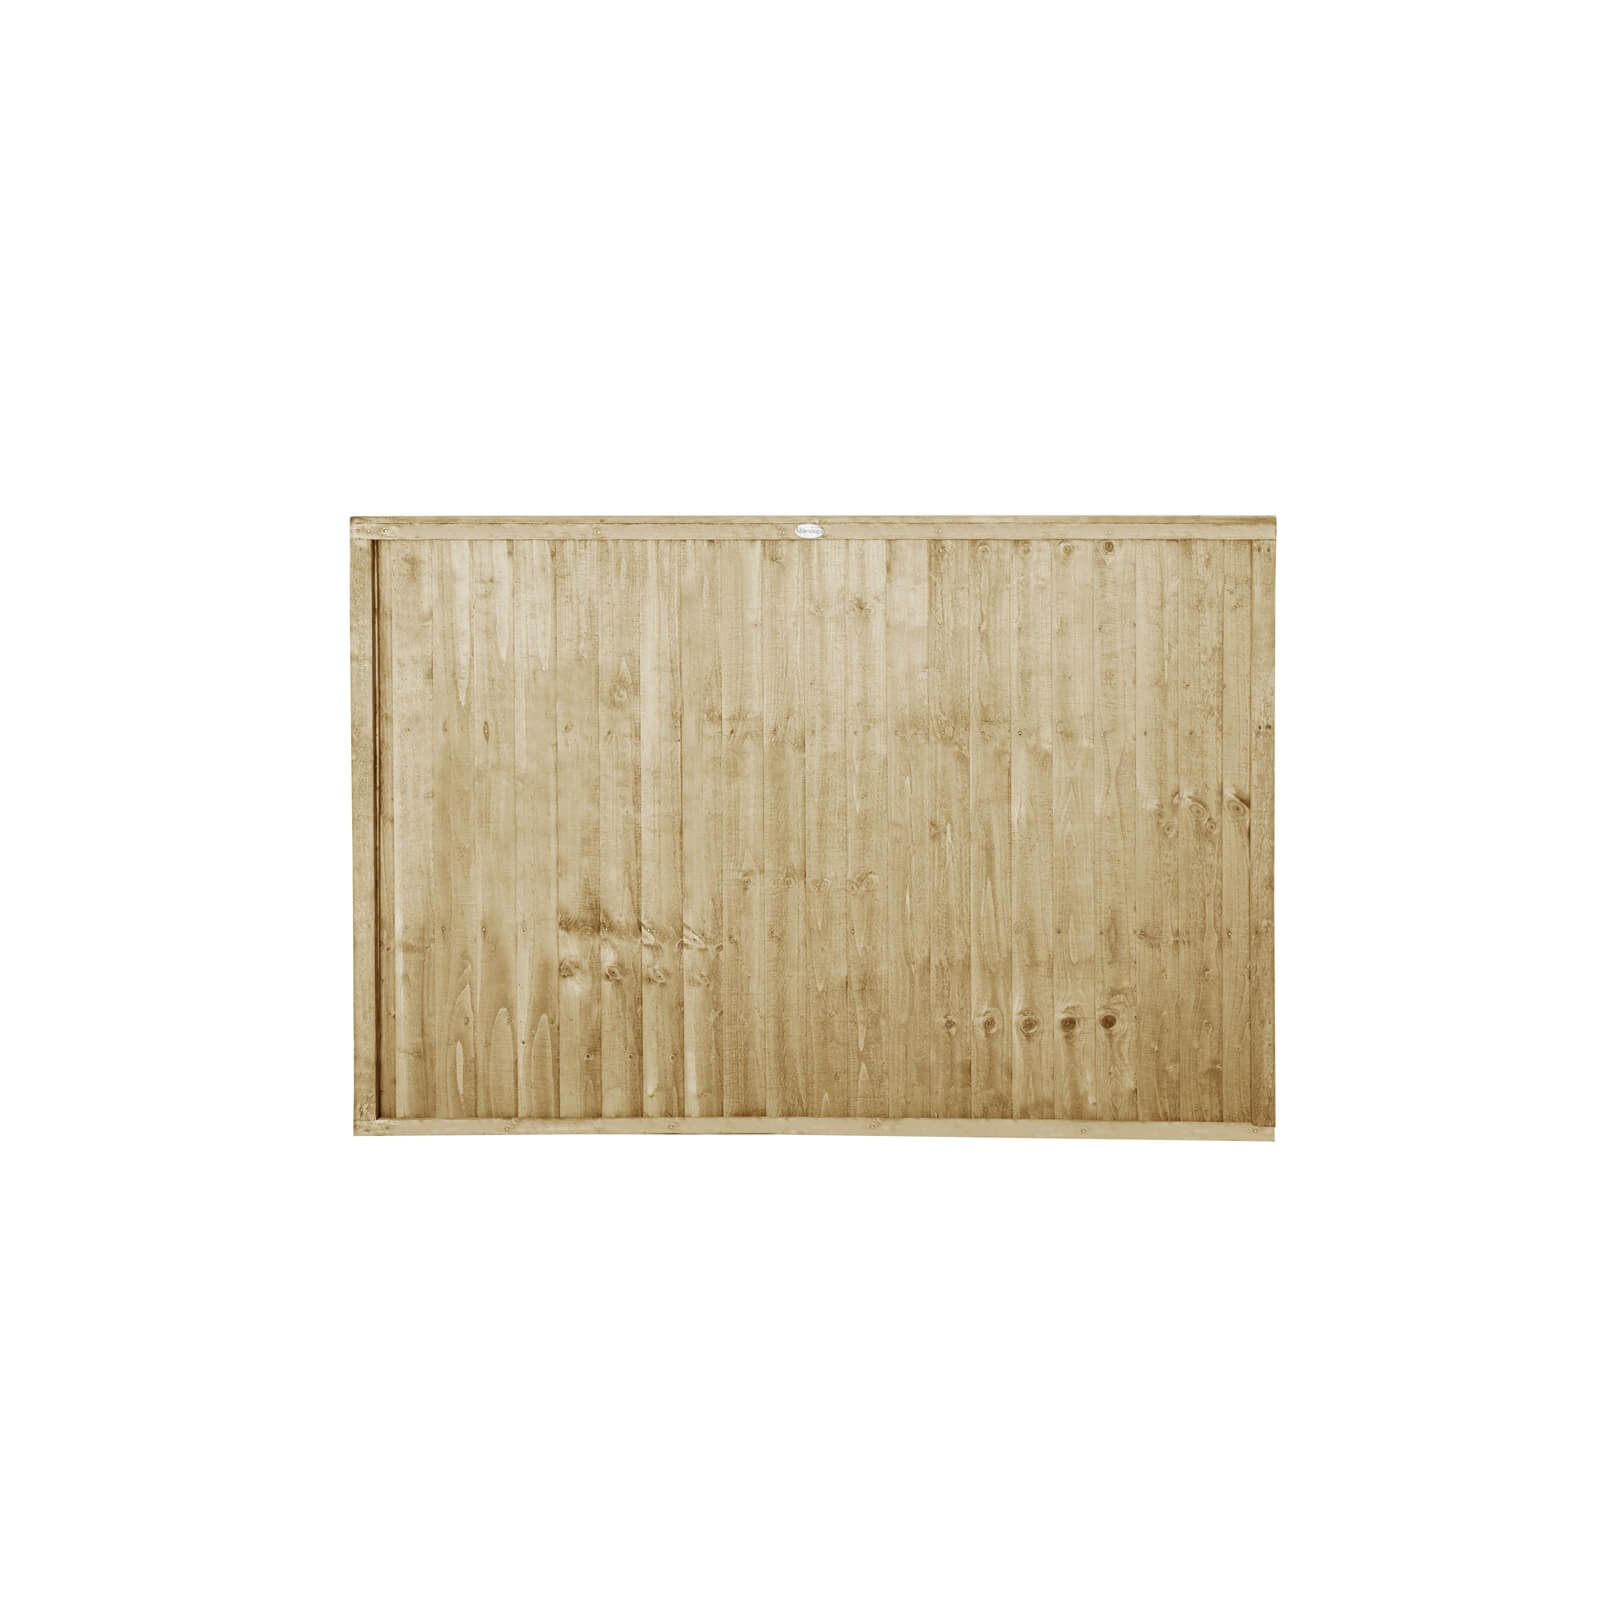 6ft x 4ft (1.83m x 1.22m) Pressure Treated Closeboard Fence Panel - Pack of 5